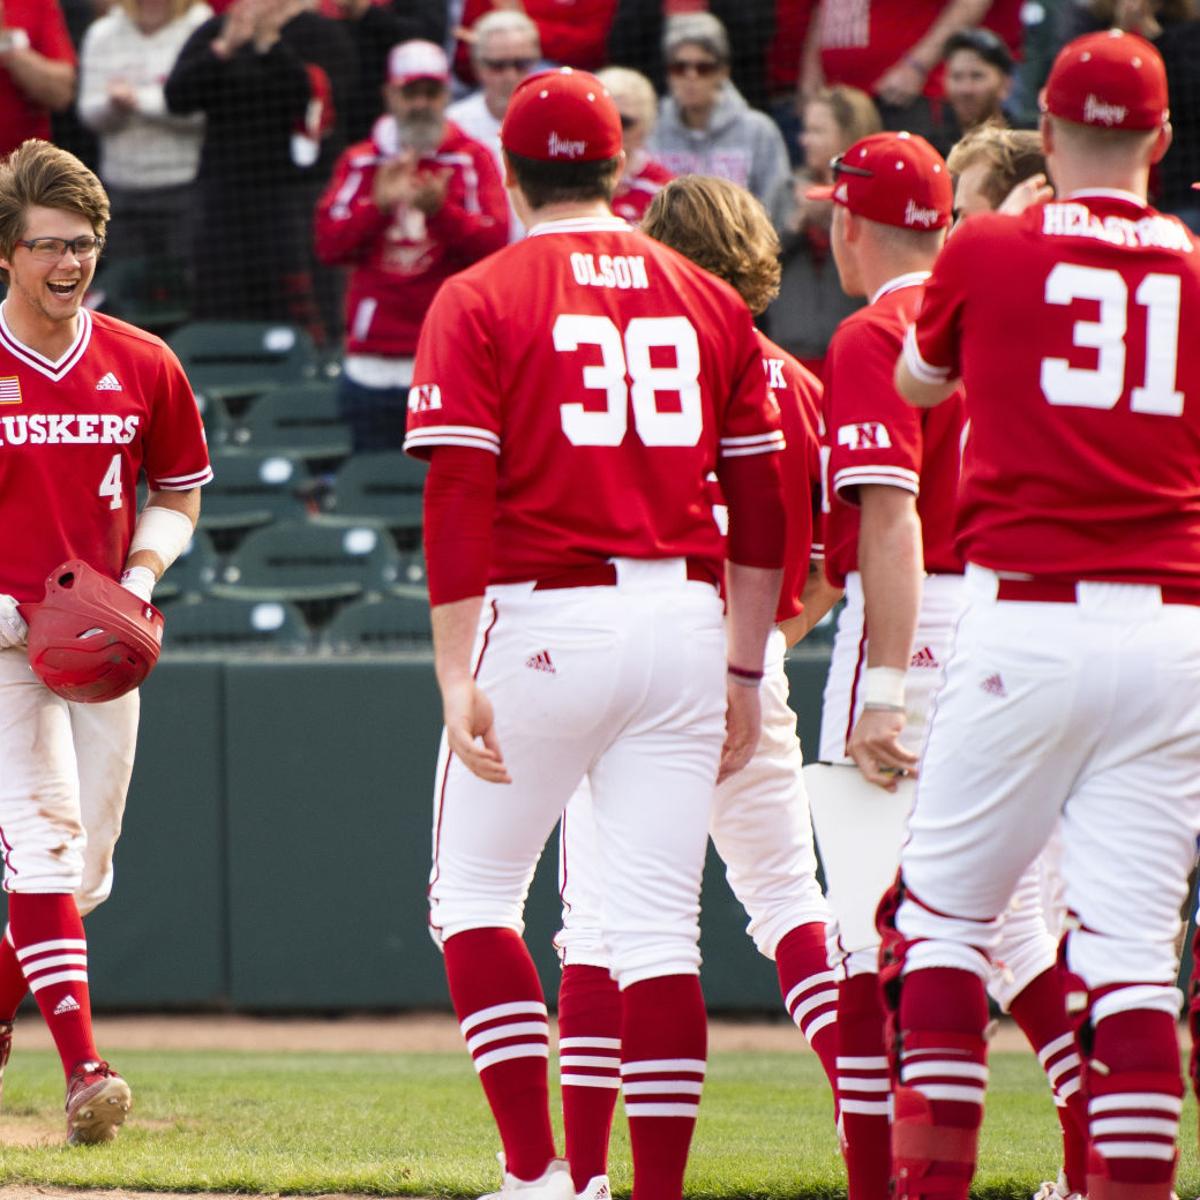 Husker Baseball Schedule 2022 Nu Releases Its 2022 Baseball Schedule: Here Are Some Takeaways (And The  Full Schedule) | Baseball | Journalstar.com